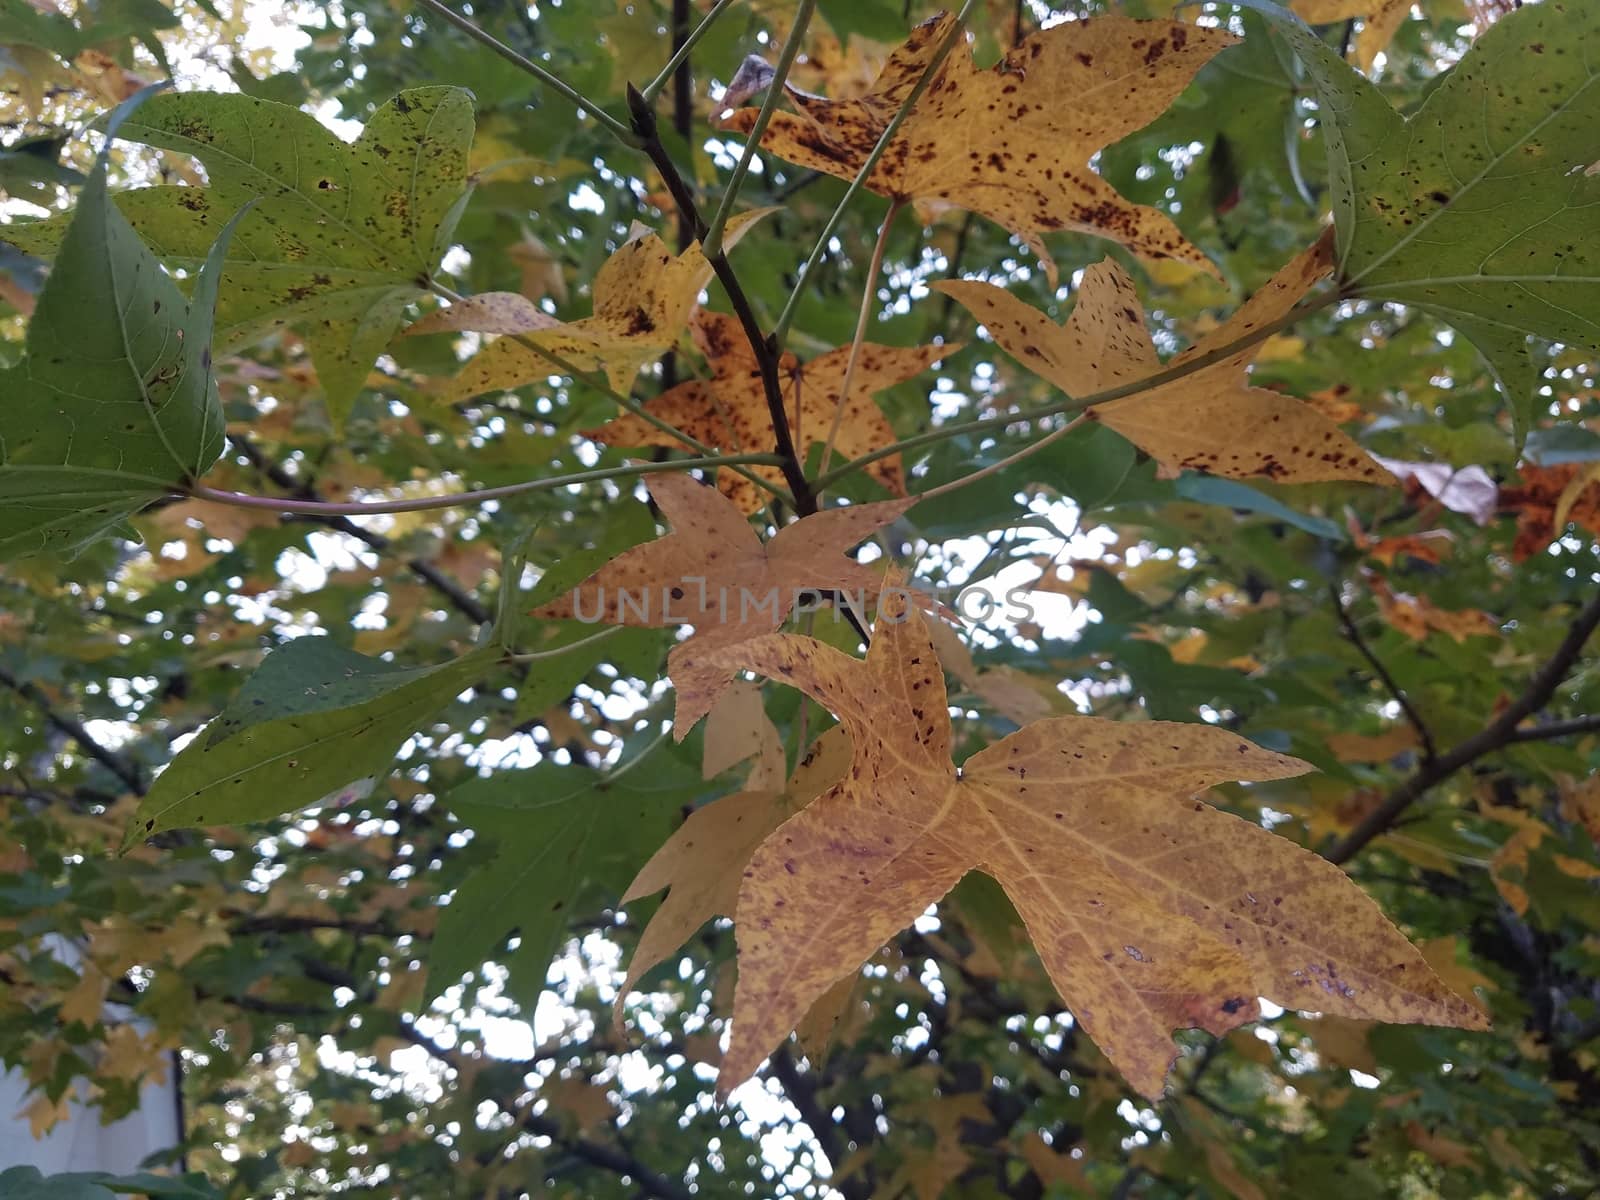 spots on yellow and green leaves in tree branches